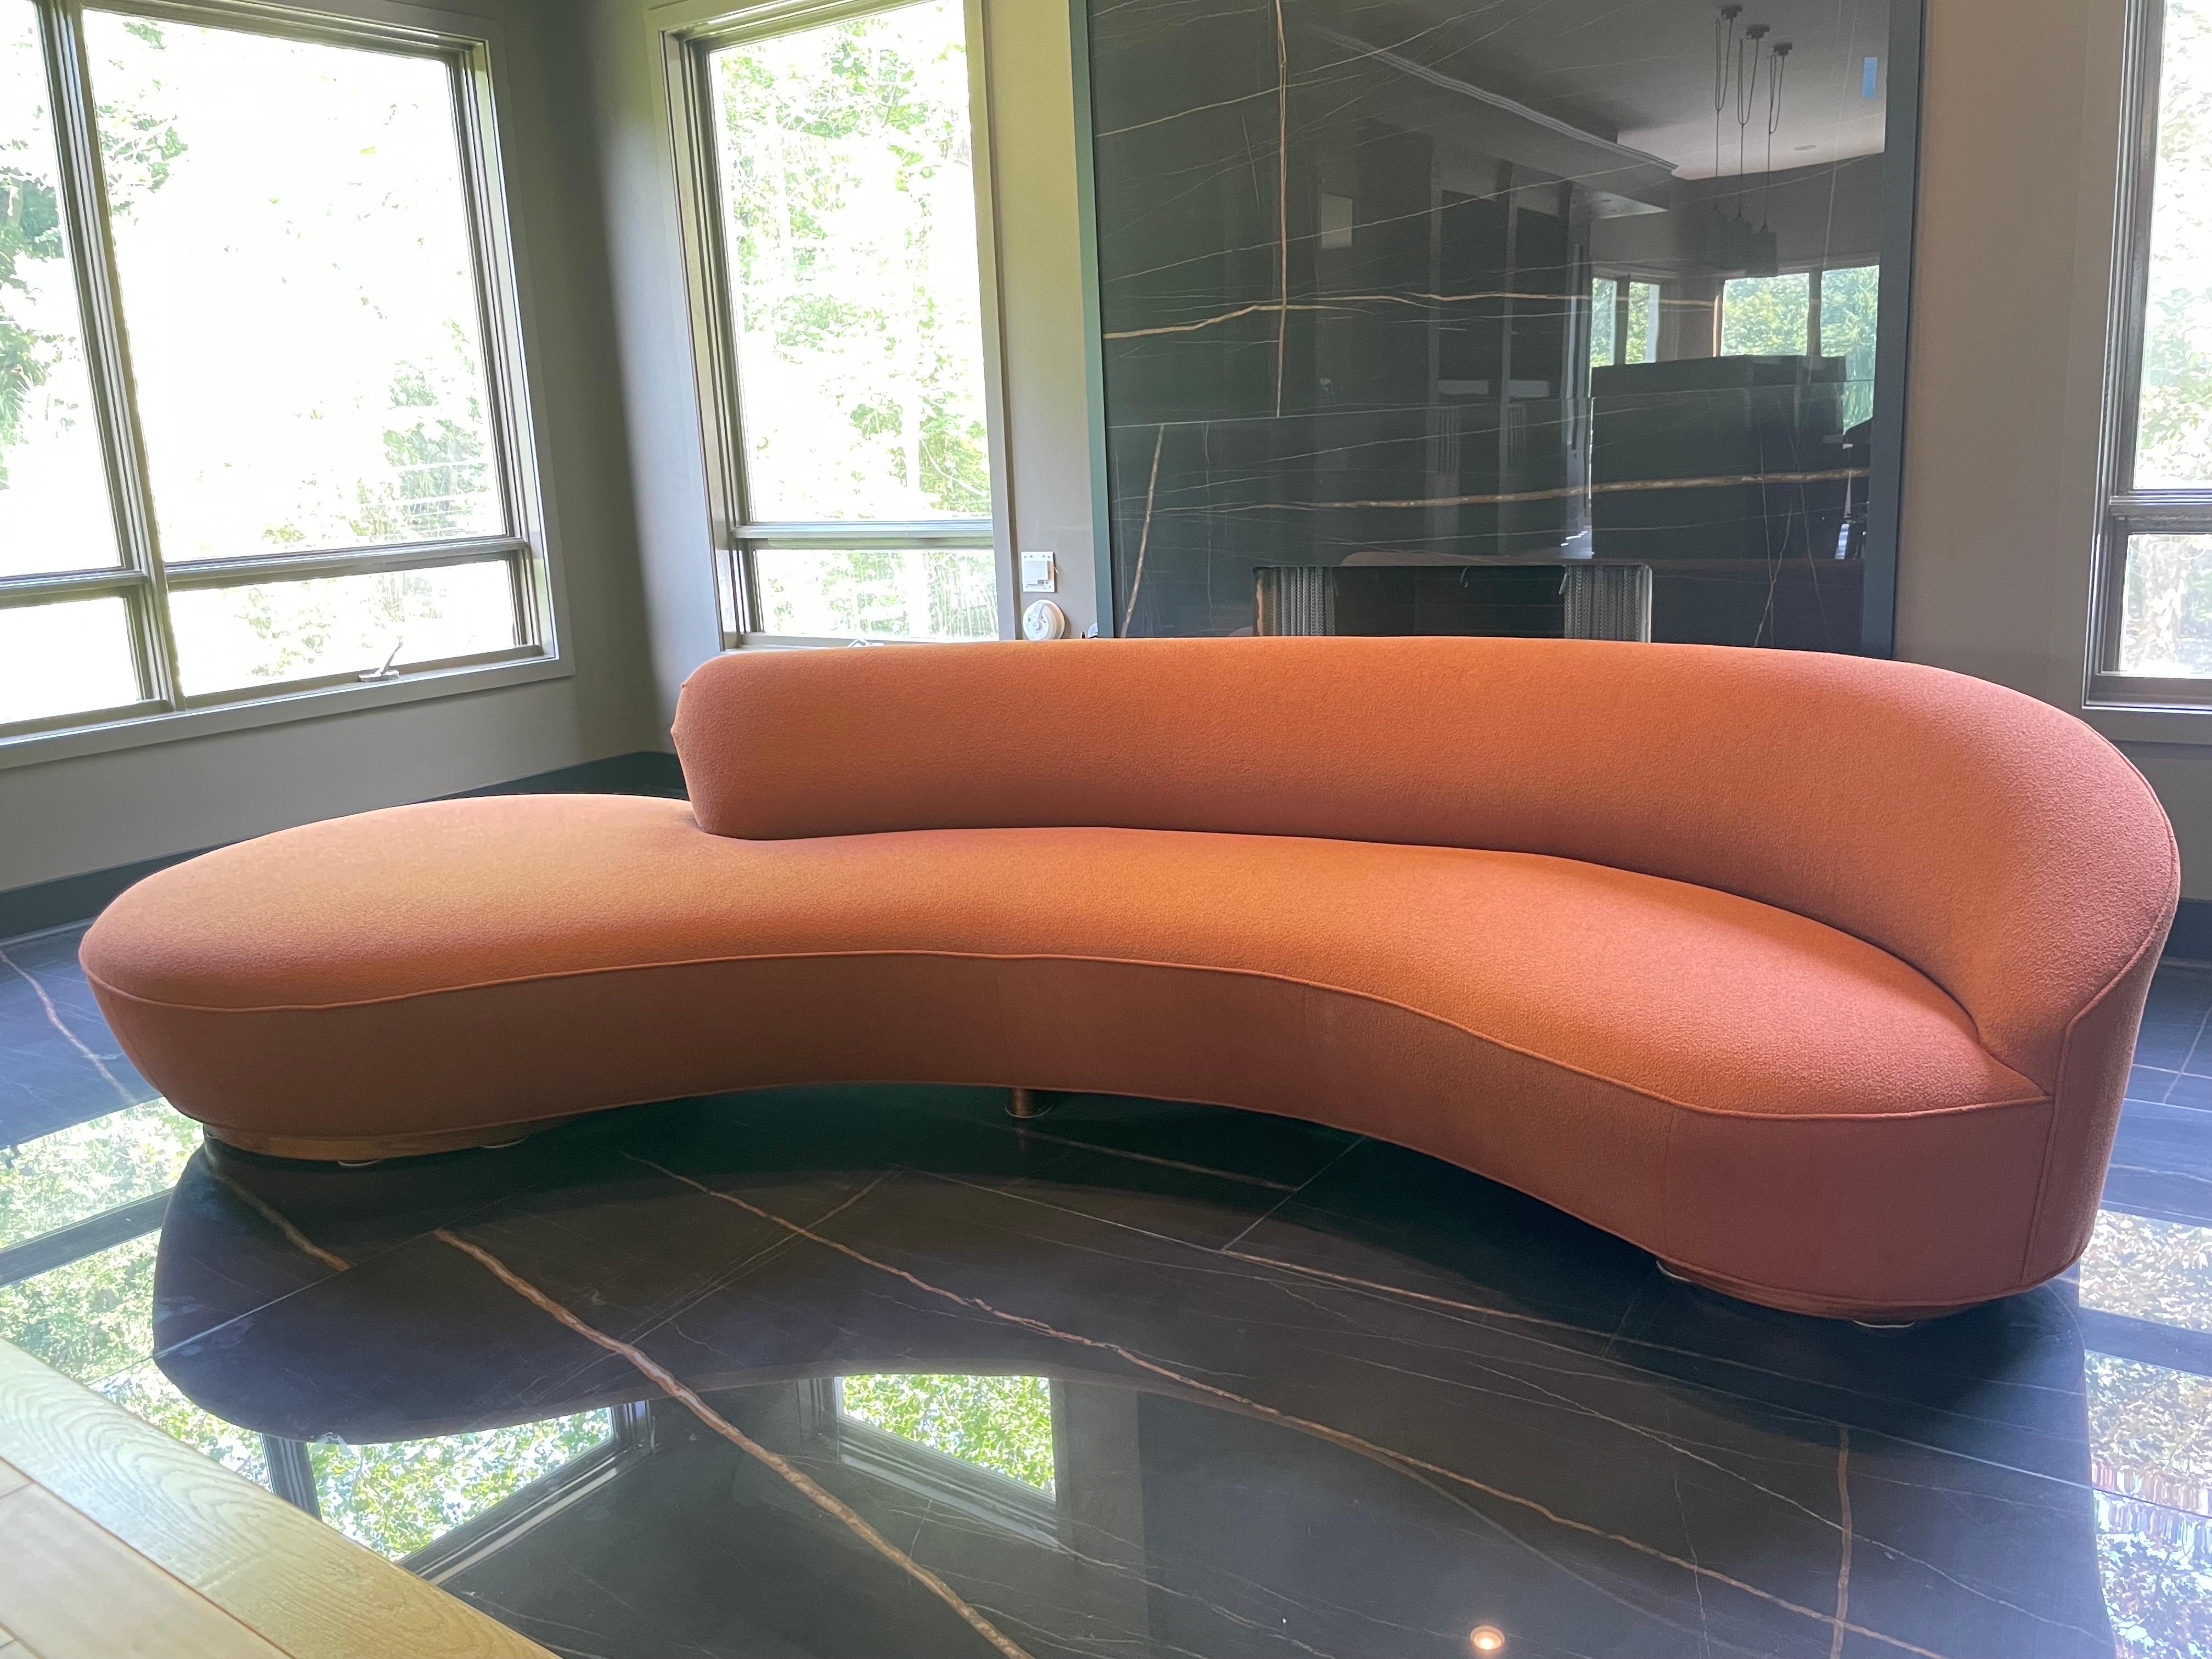 Vladimir Kagan (1927-2016)

Serpentine sofa, #150

Exceptional and large unique curvaceous form

USA, newly upholstered rust color bouclé fabric, walnut base in good condition 

unmarked and comes with receipt from Haute Living 

Measures: